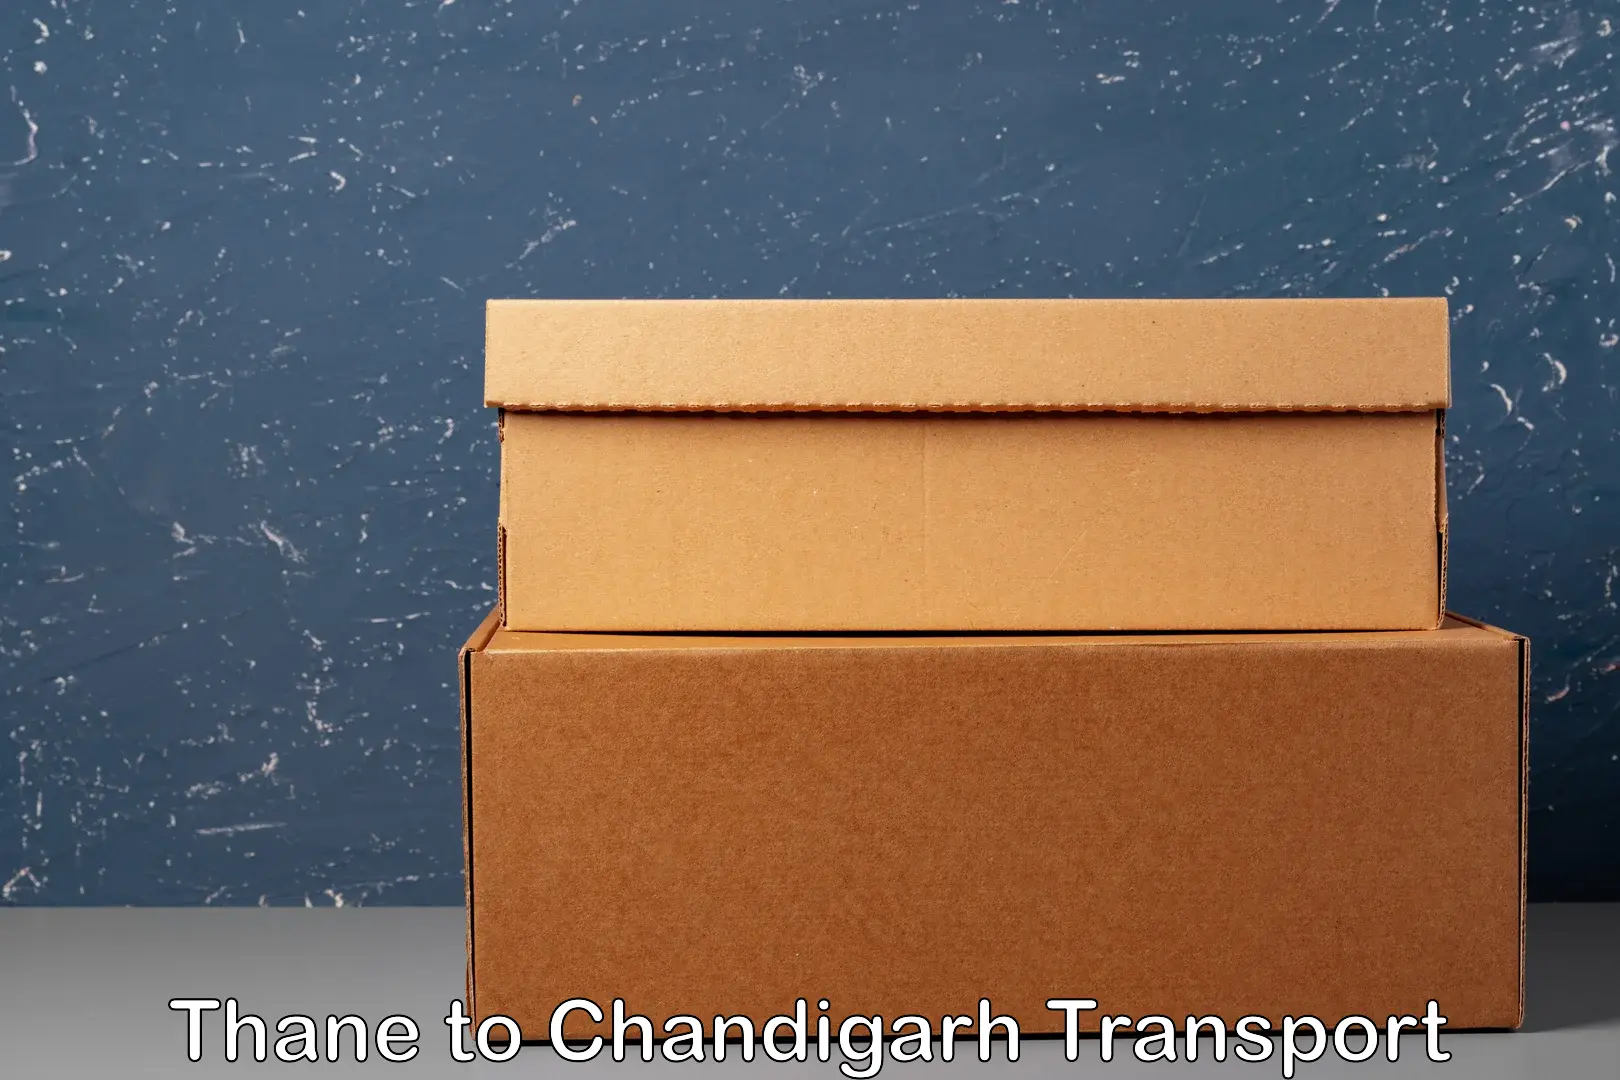 Air cargo transport services Thane to Chandigarh